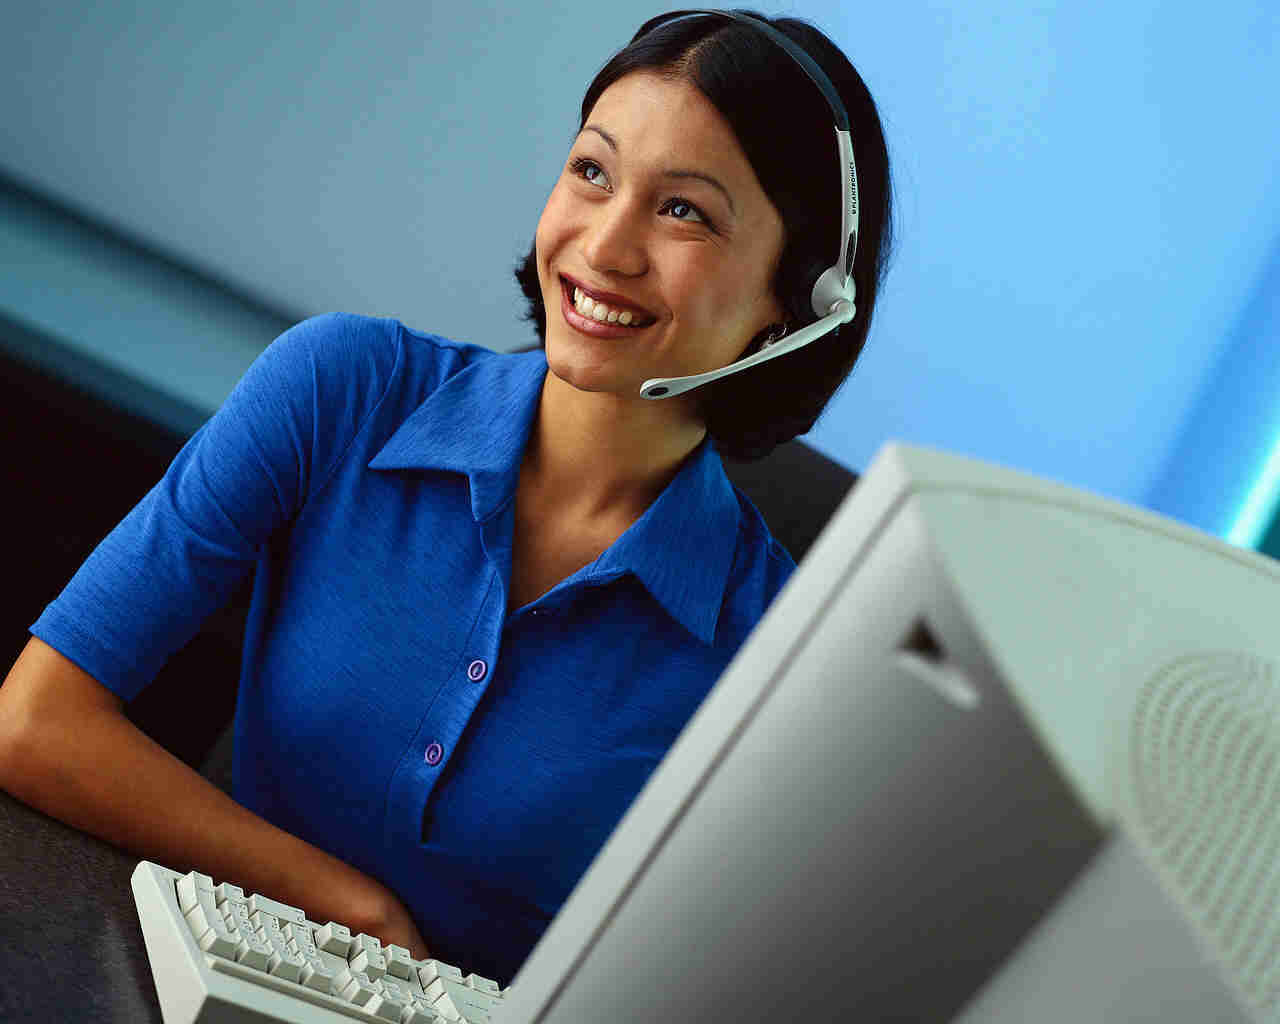 Teleconferencing service Questions